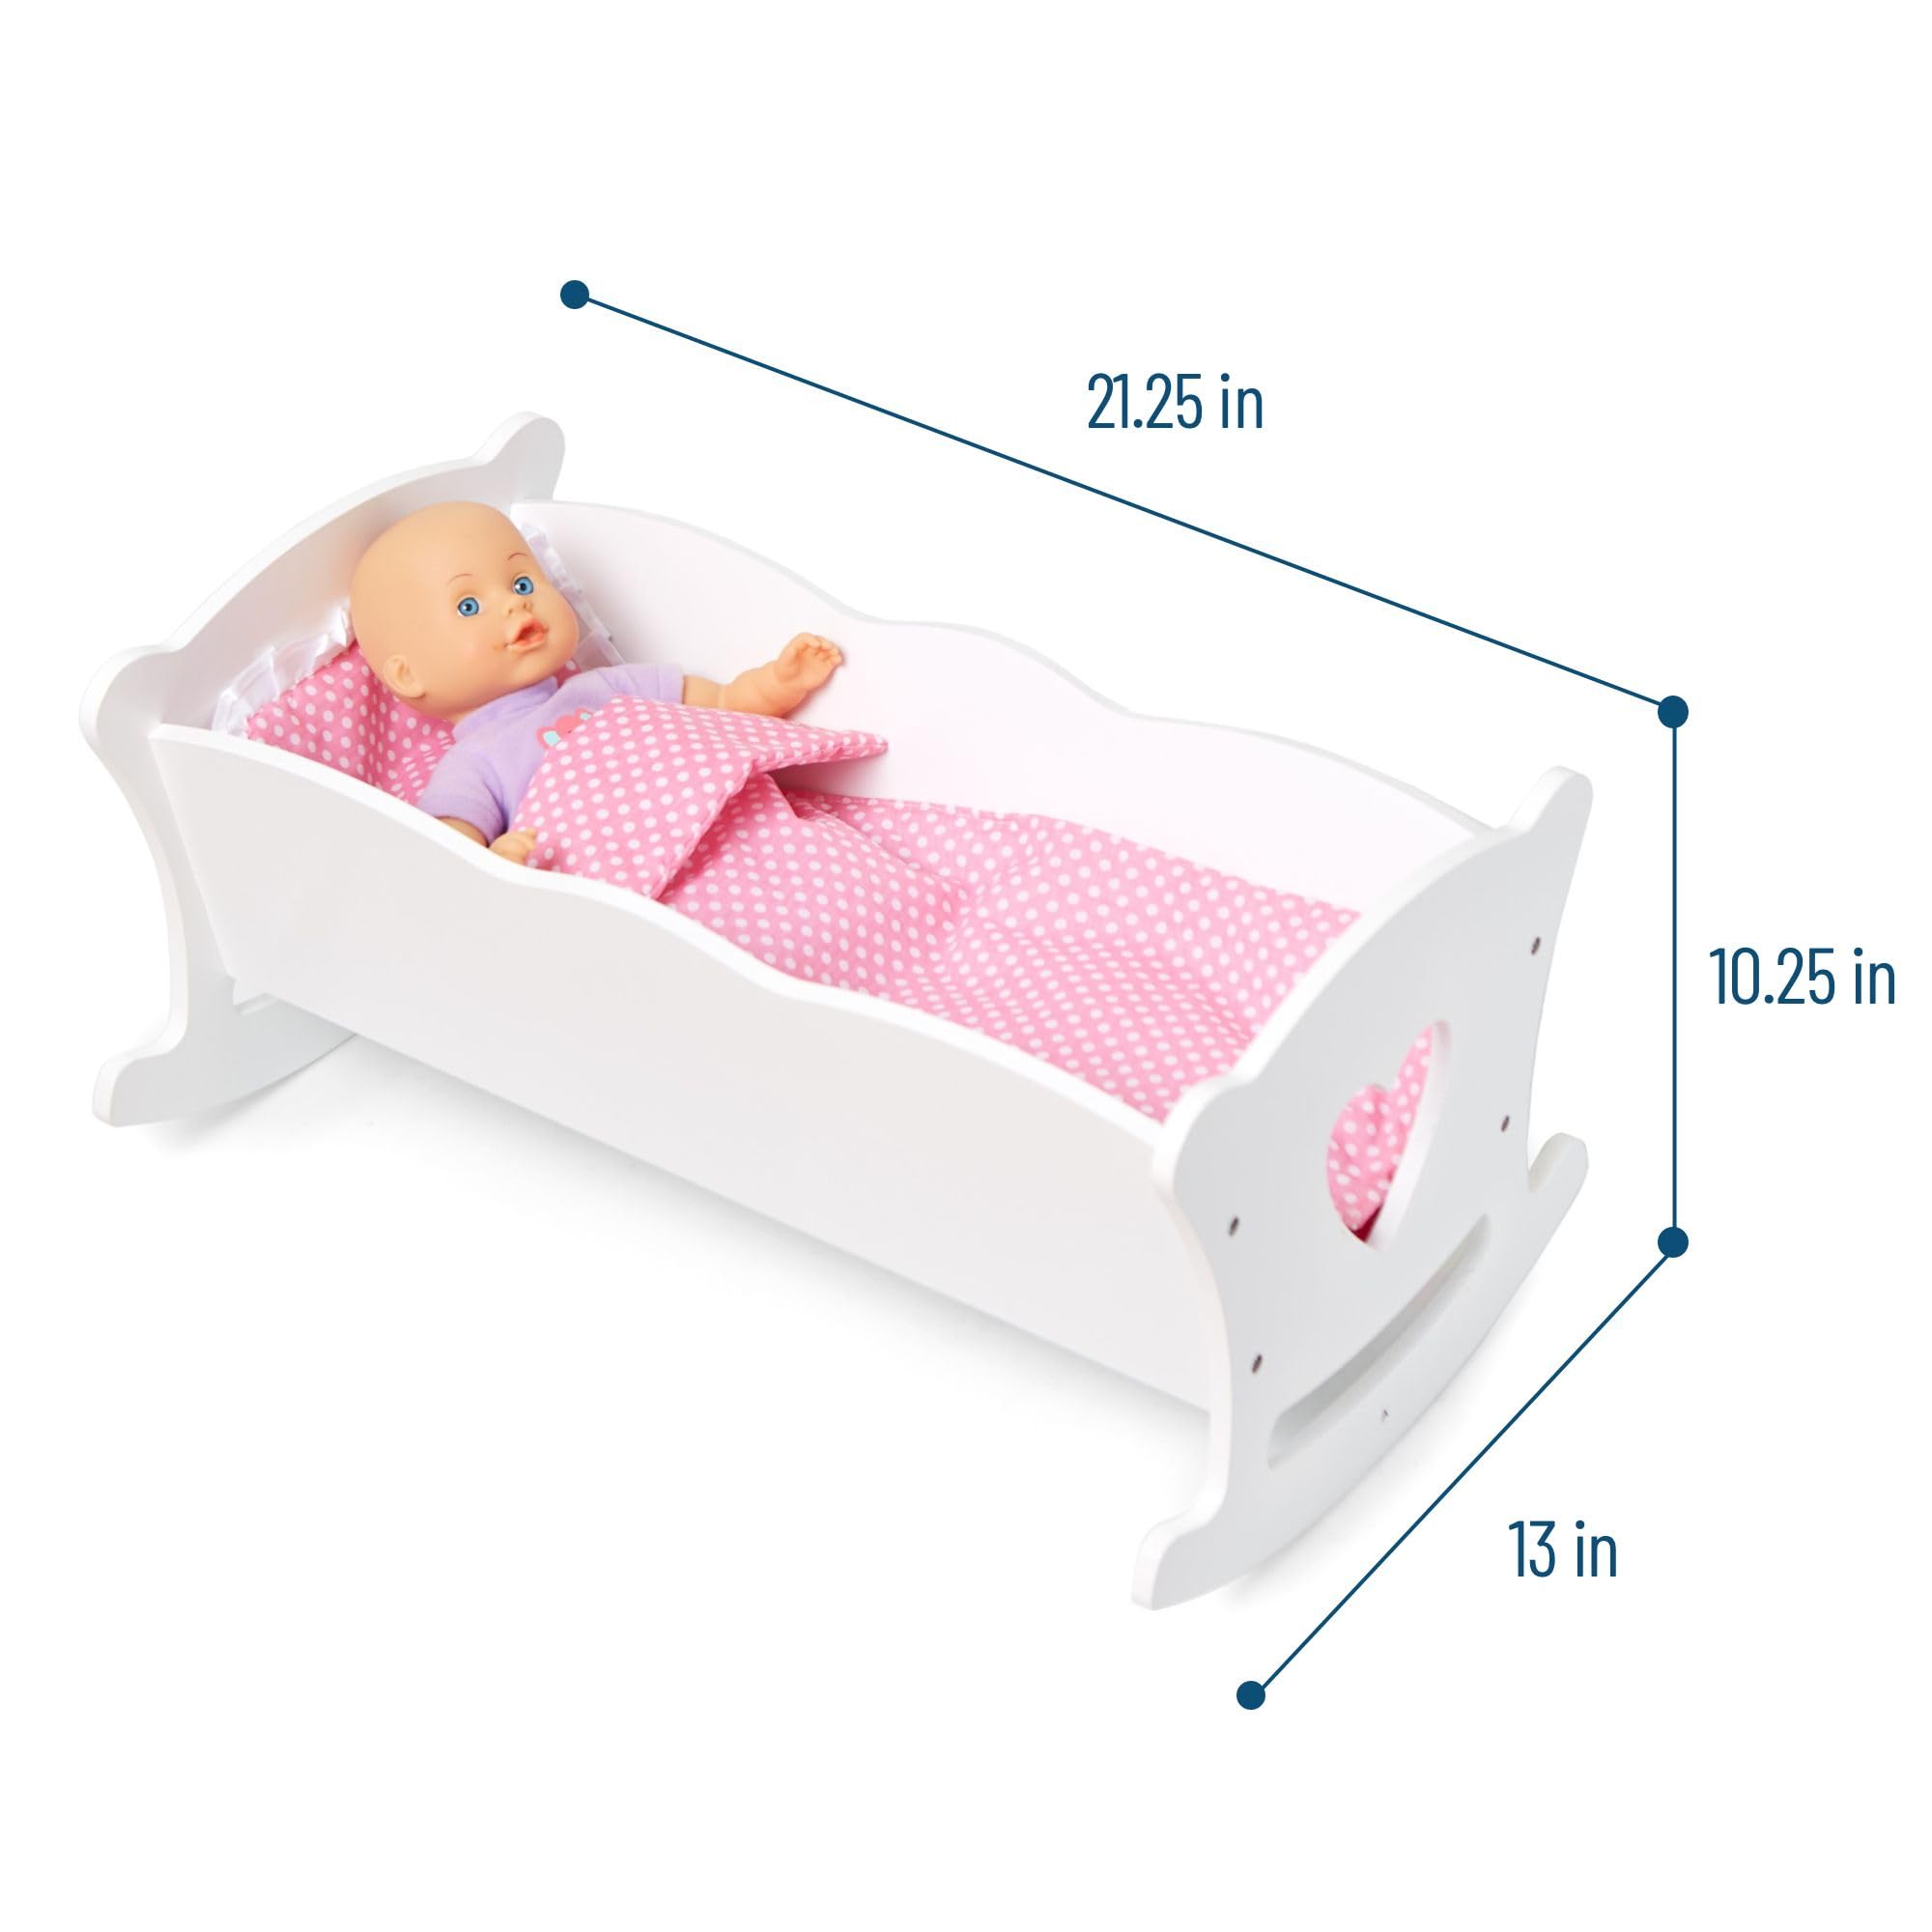 Wildkin Kids Doll Cradle and Bedding Set for Toddler Girls, Wooden Baby Doll Rocking Cradle Includes Pillow and Blanket, Fits Dolls Up To 20 Inches, Compatible with Most Popular Dolls (White)